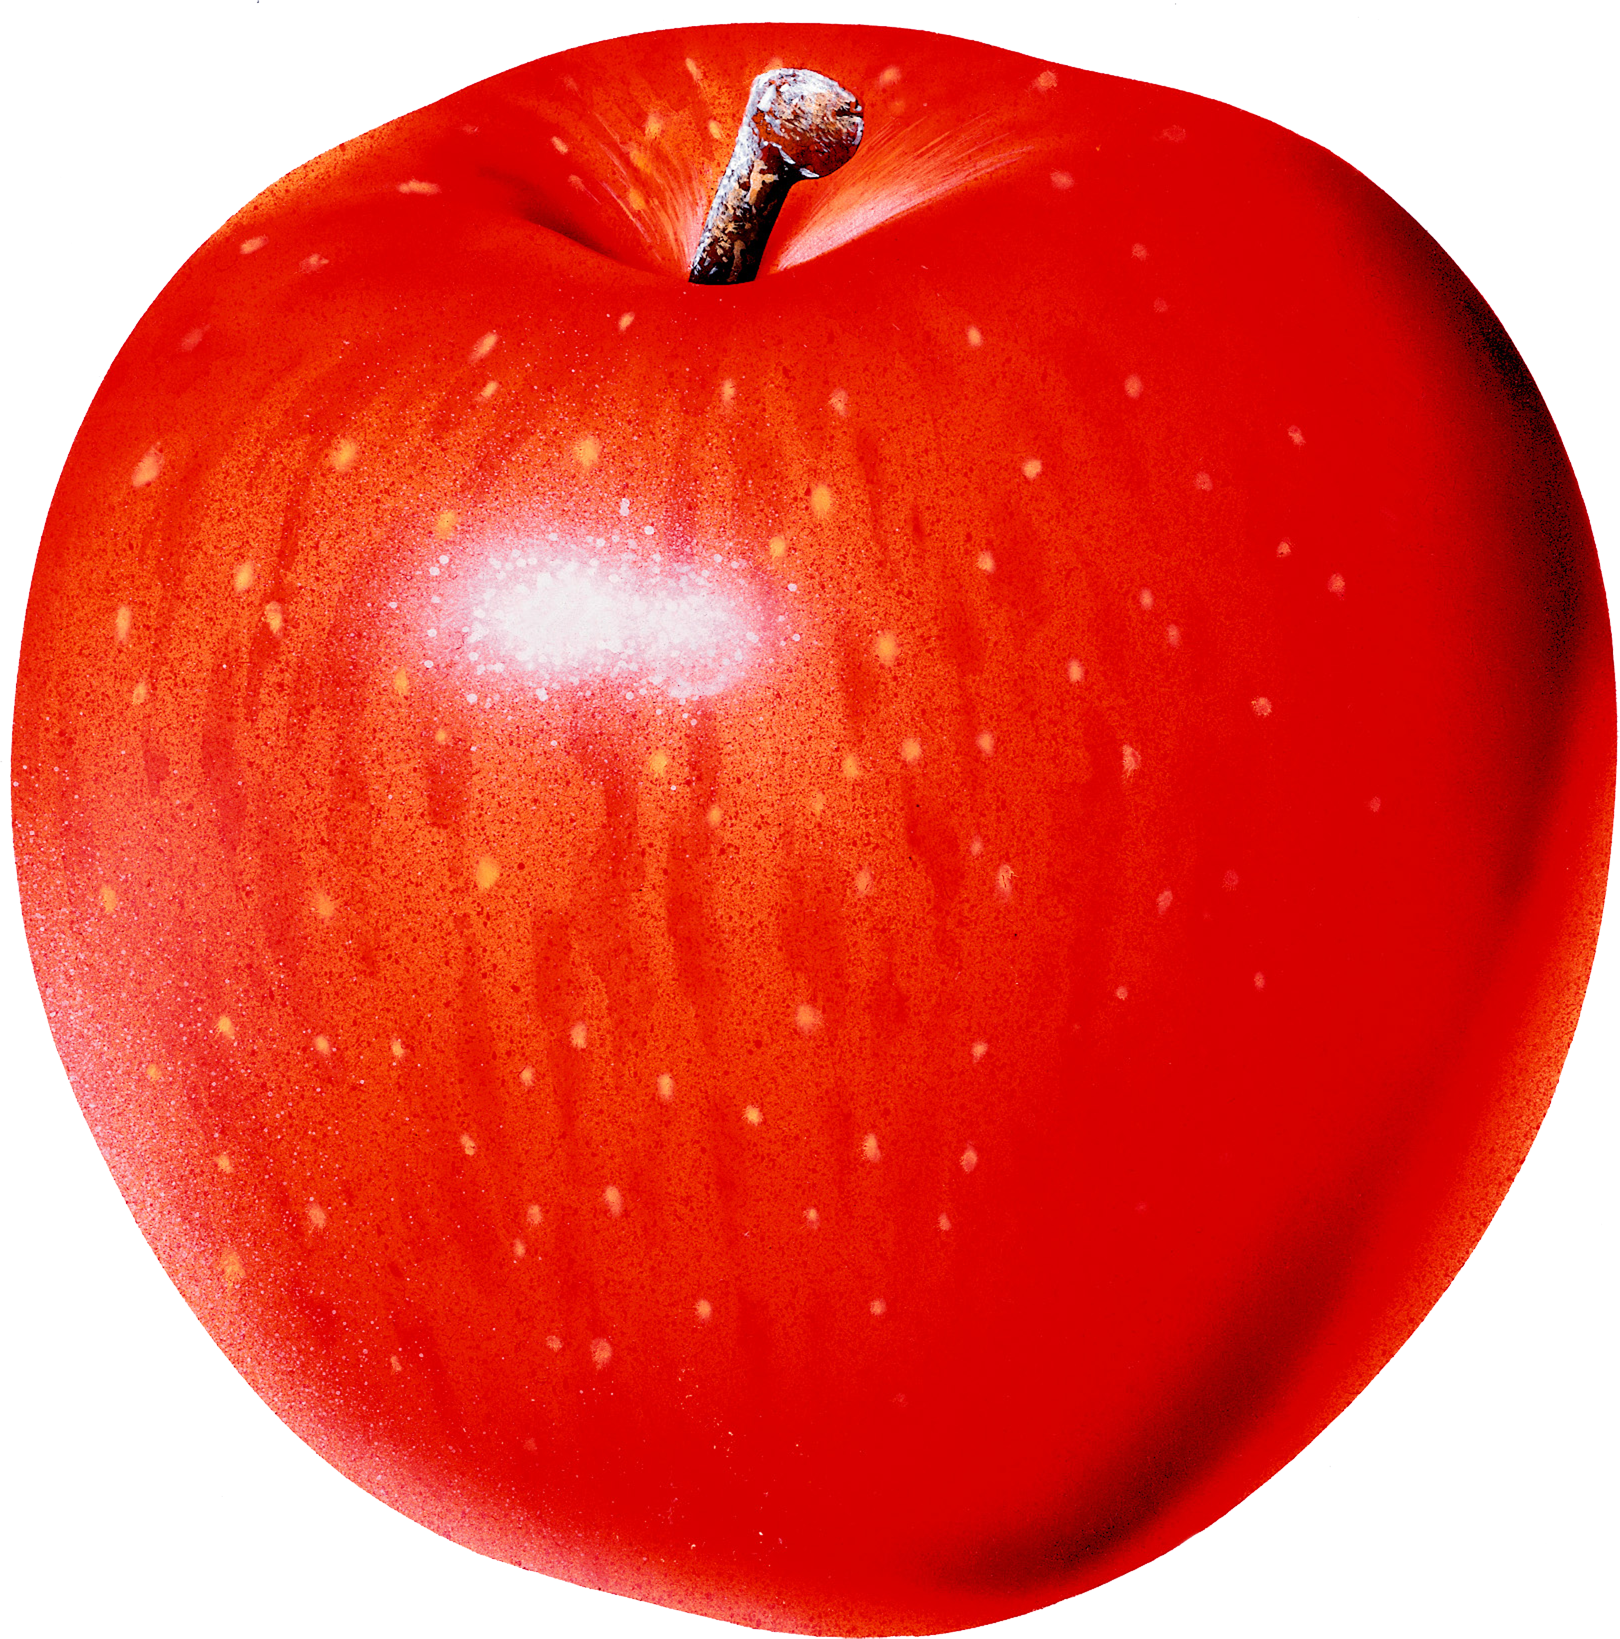 Red Apple’s